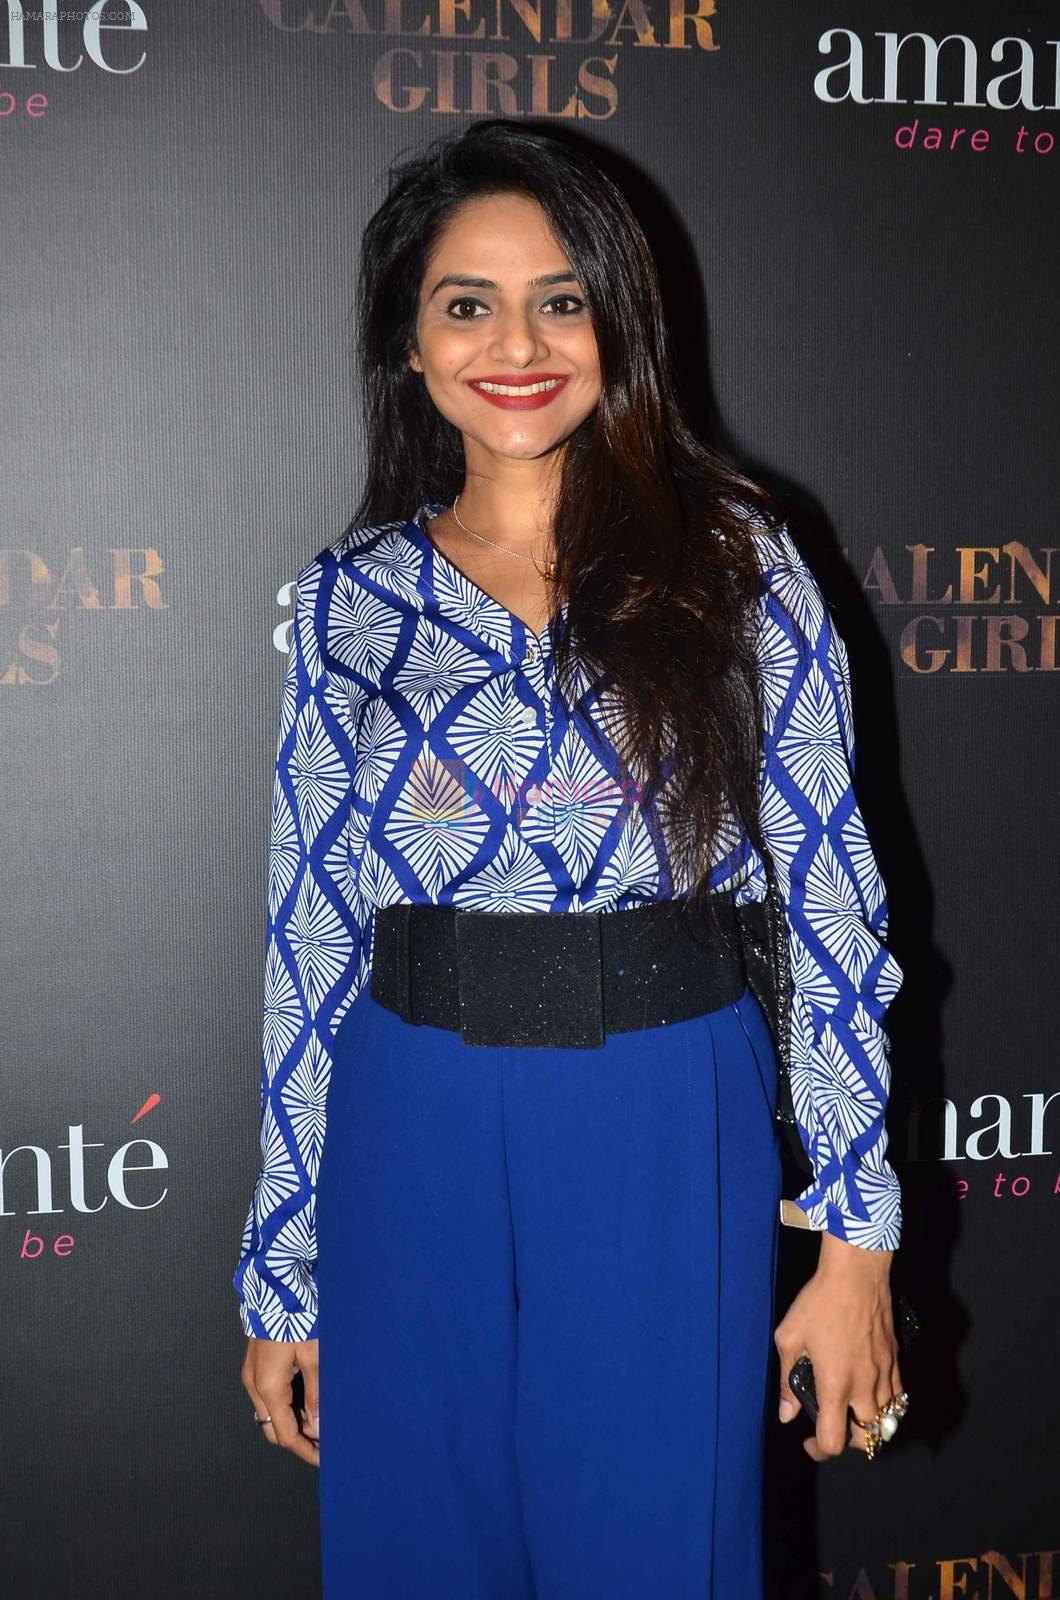 Madhoo shah at Madhur's Calendar Girls launch with Amante lingerie show in Four Seasons on 17th July 2015